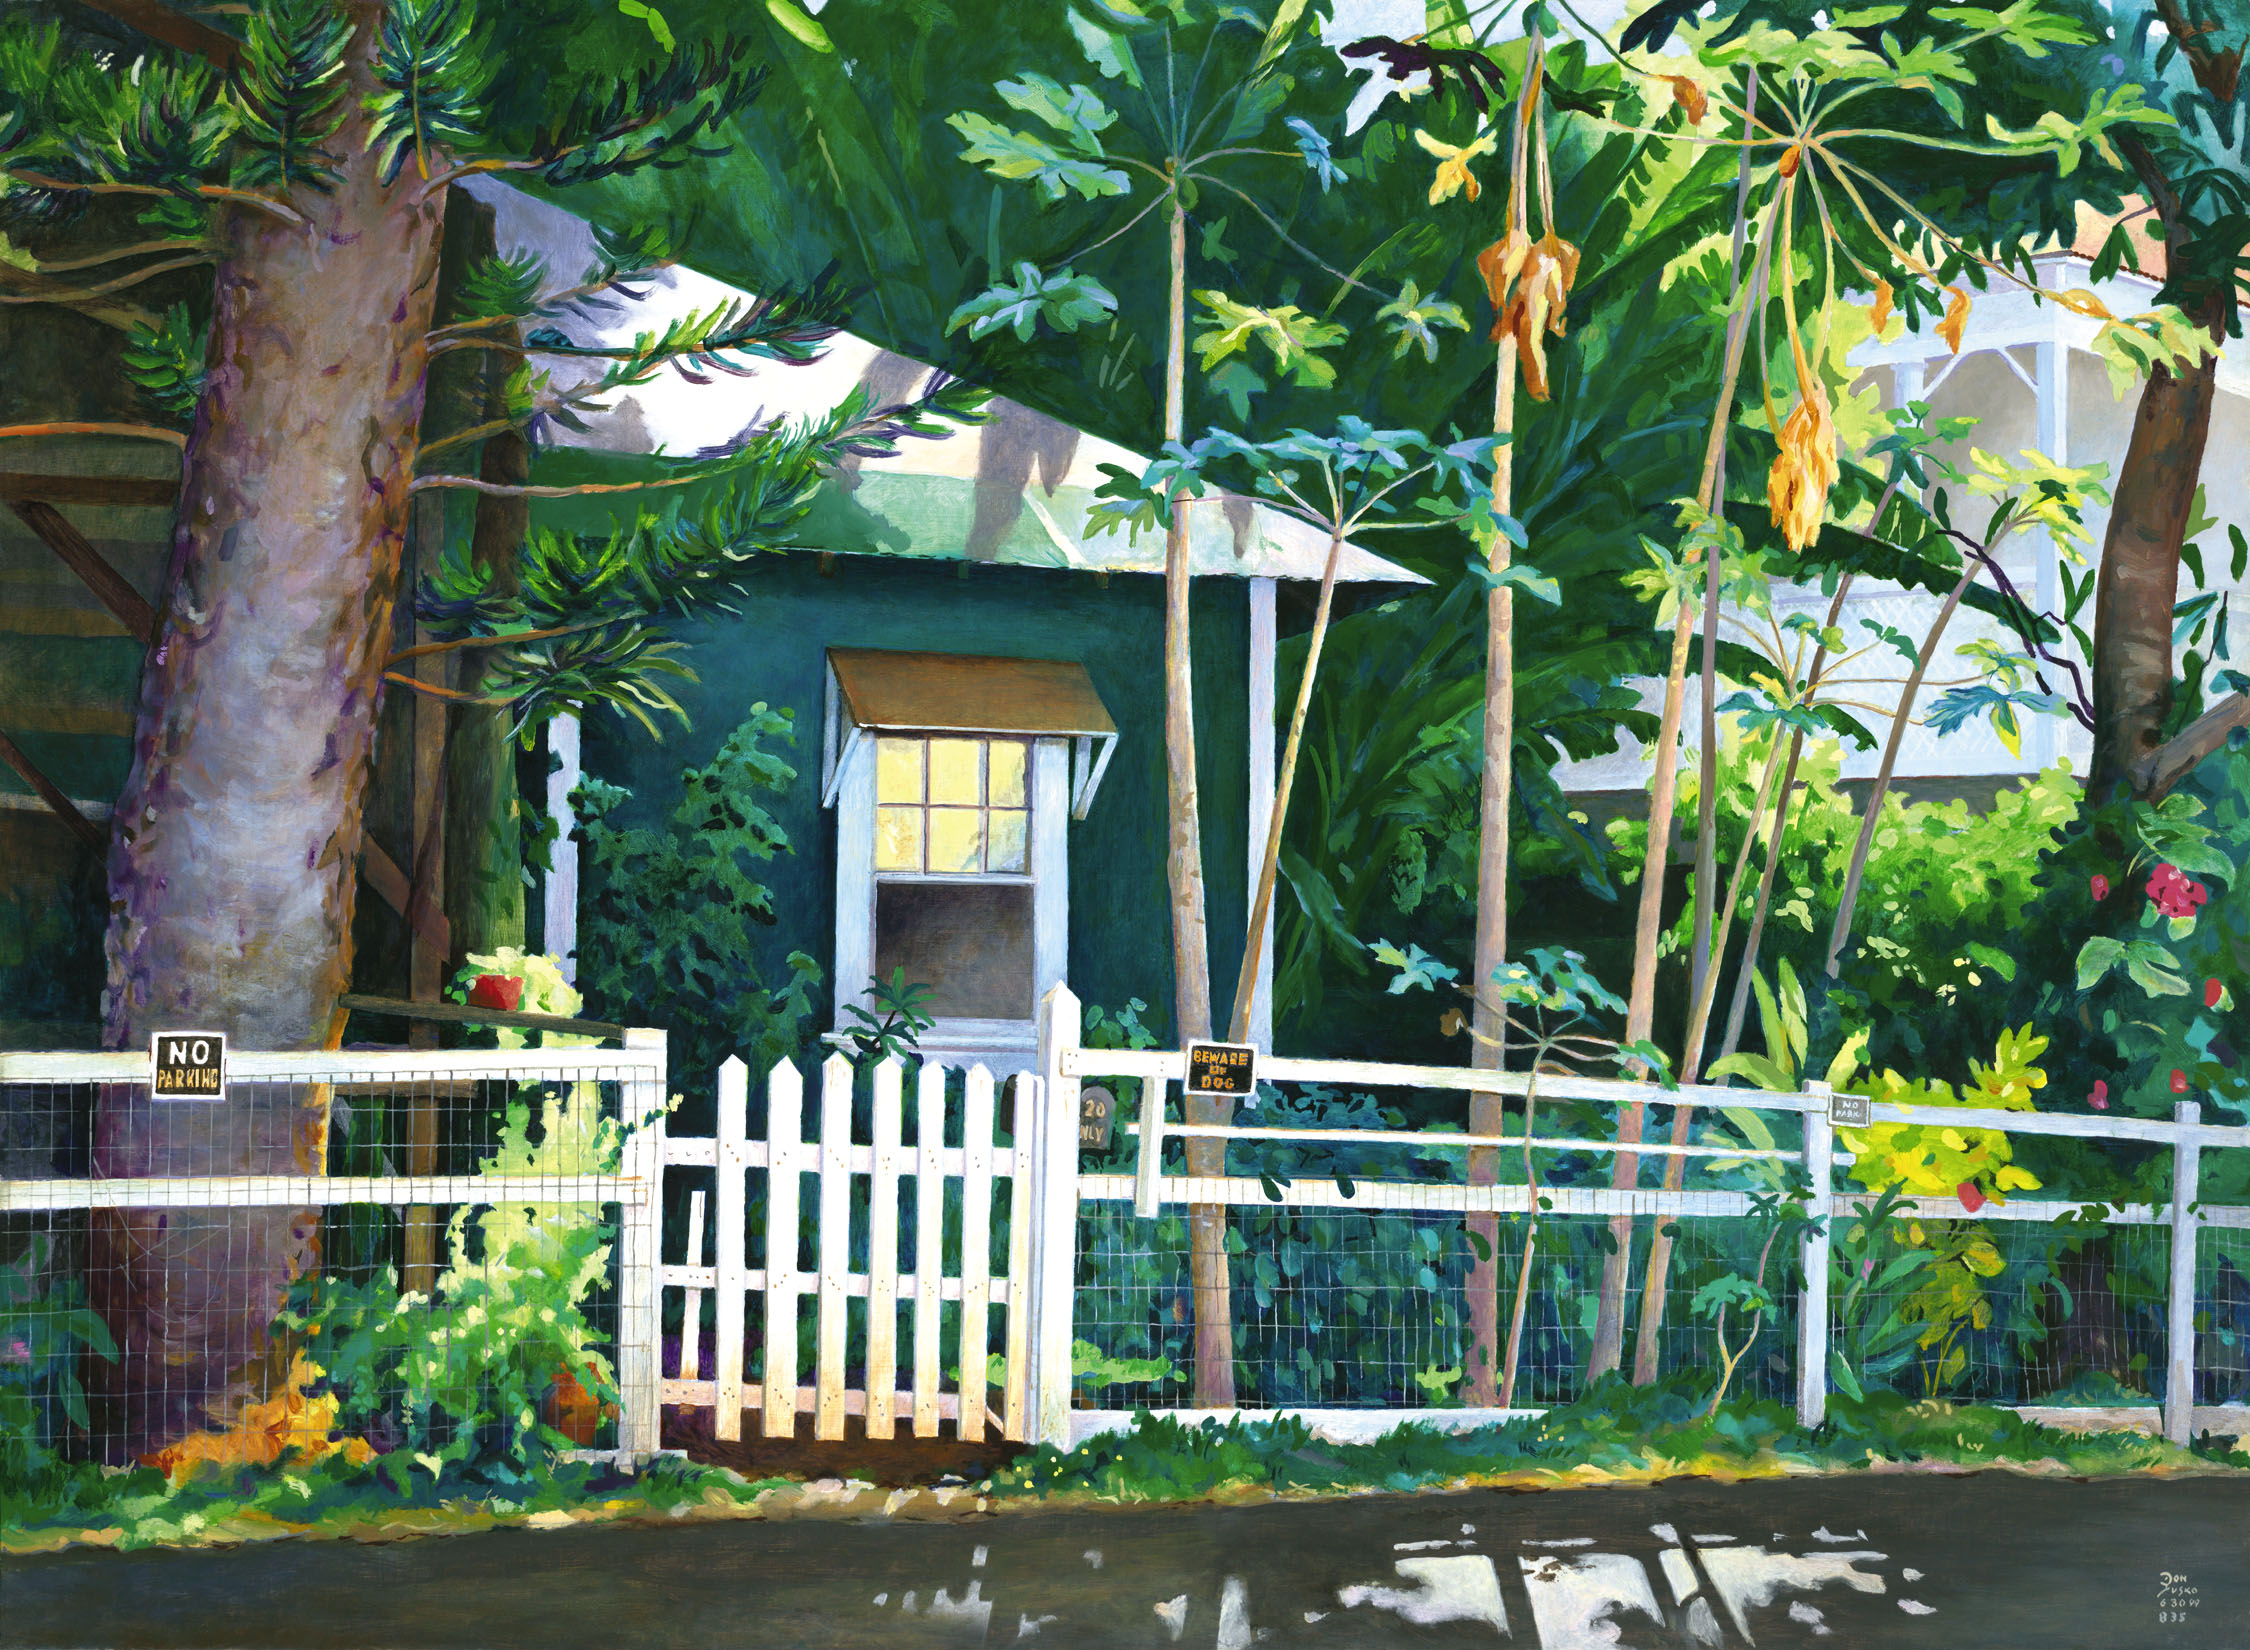 Giclee and painting, Lahaina Canehouse by
Don Jusko